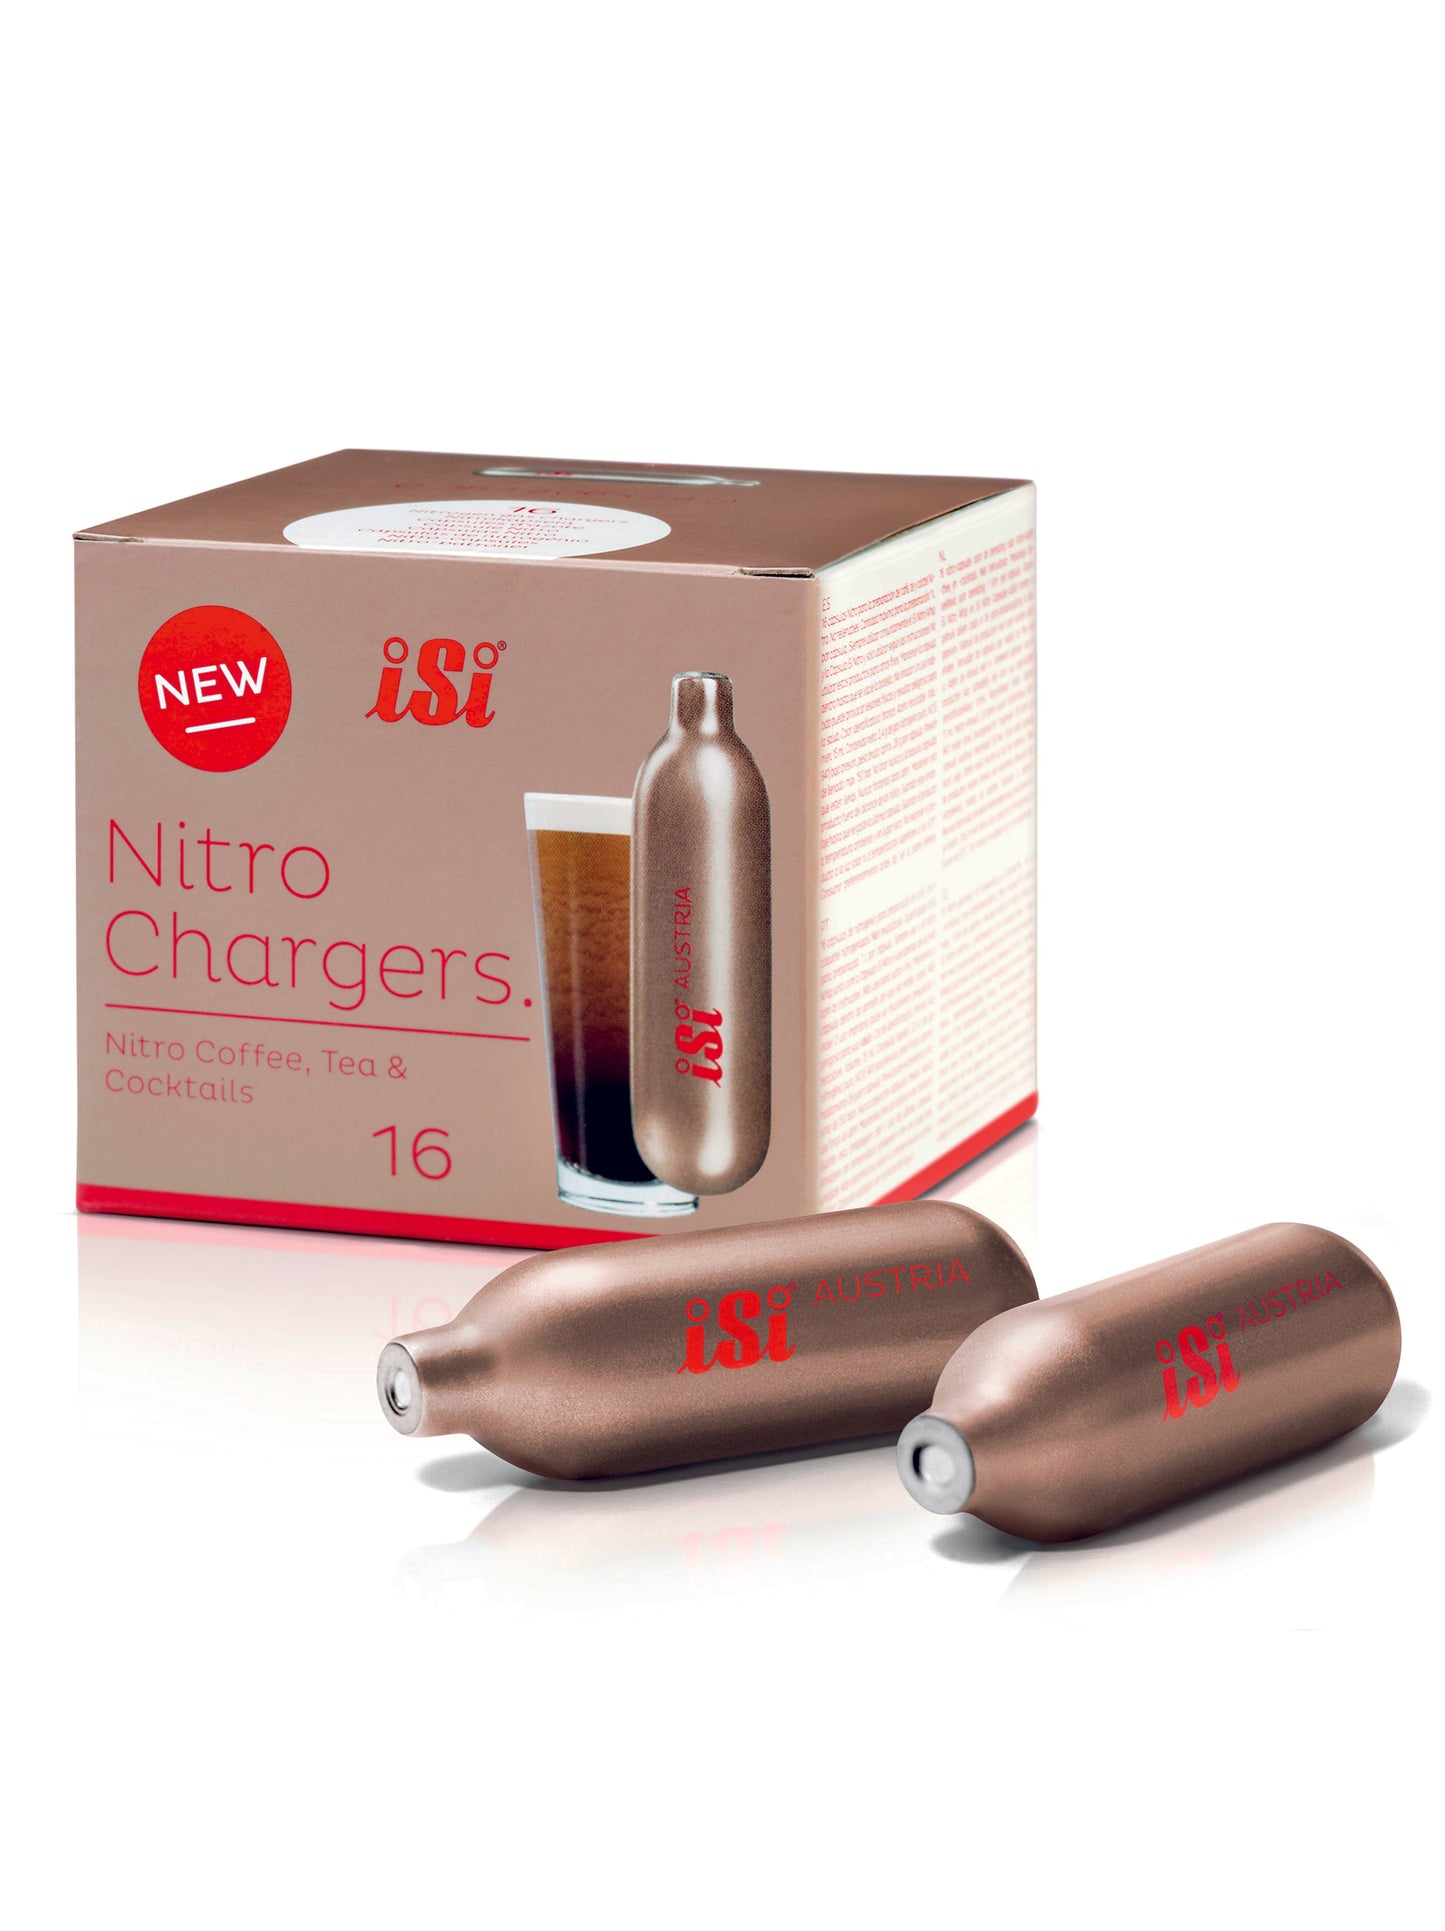 ISI Nitro Chargers- 96 pack